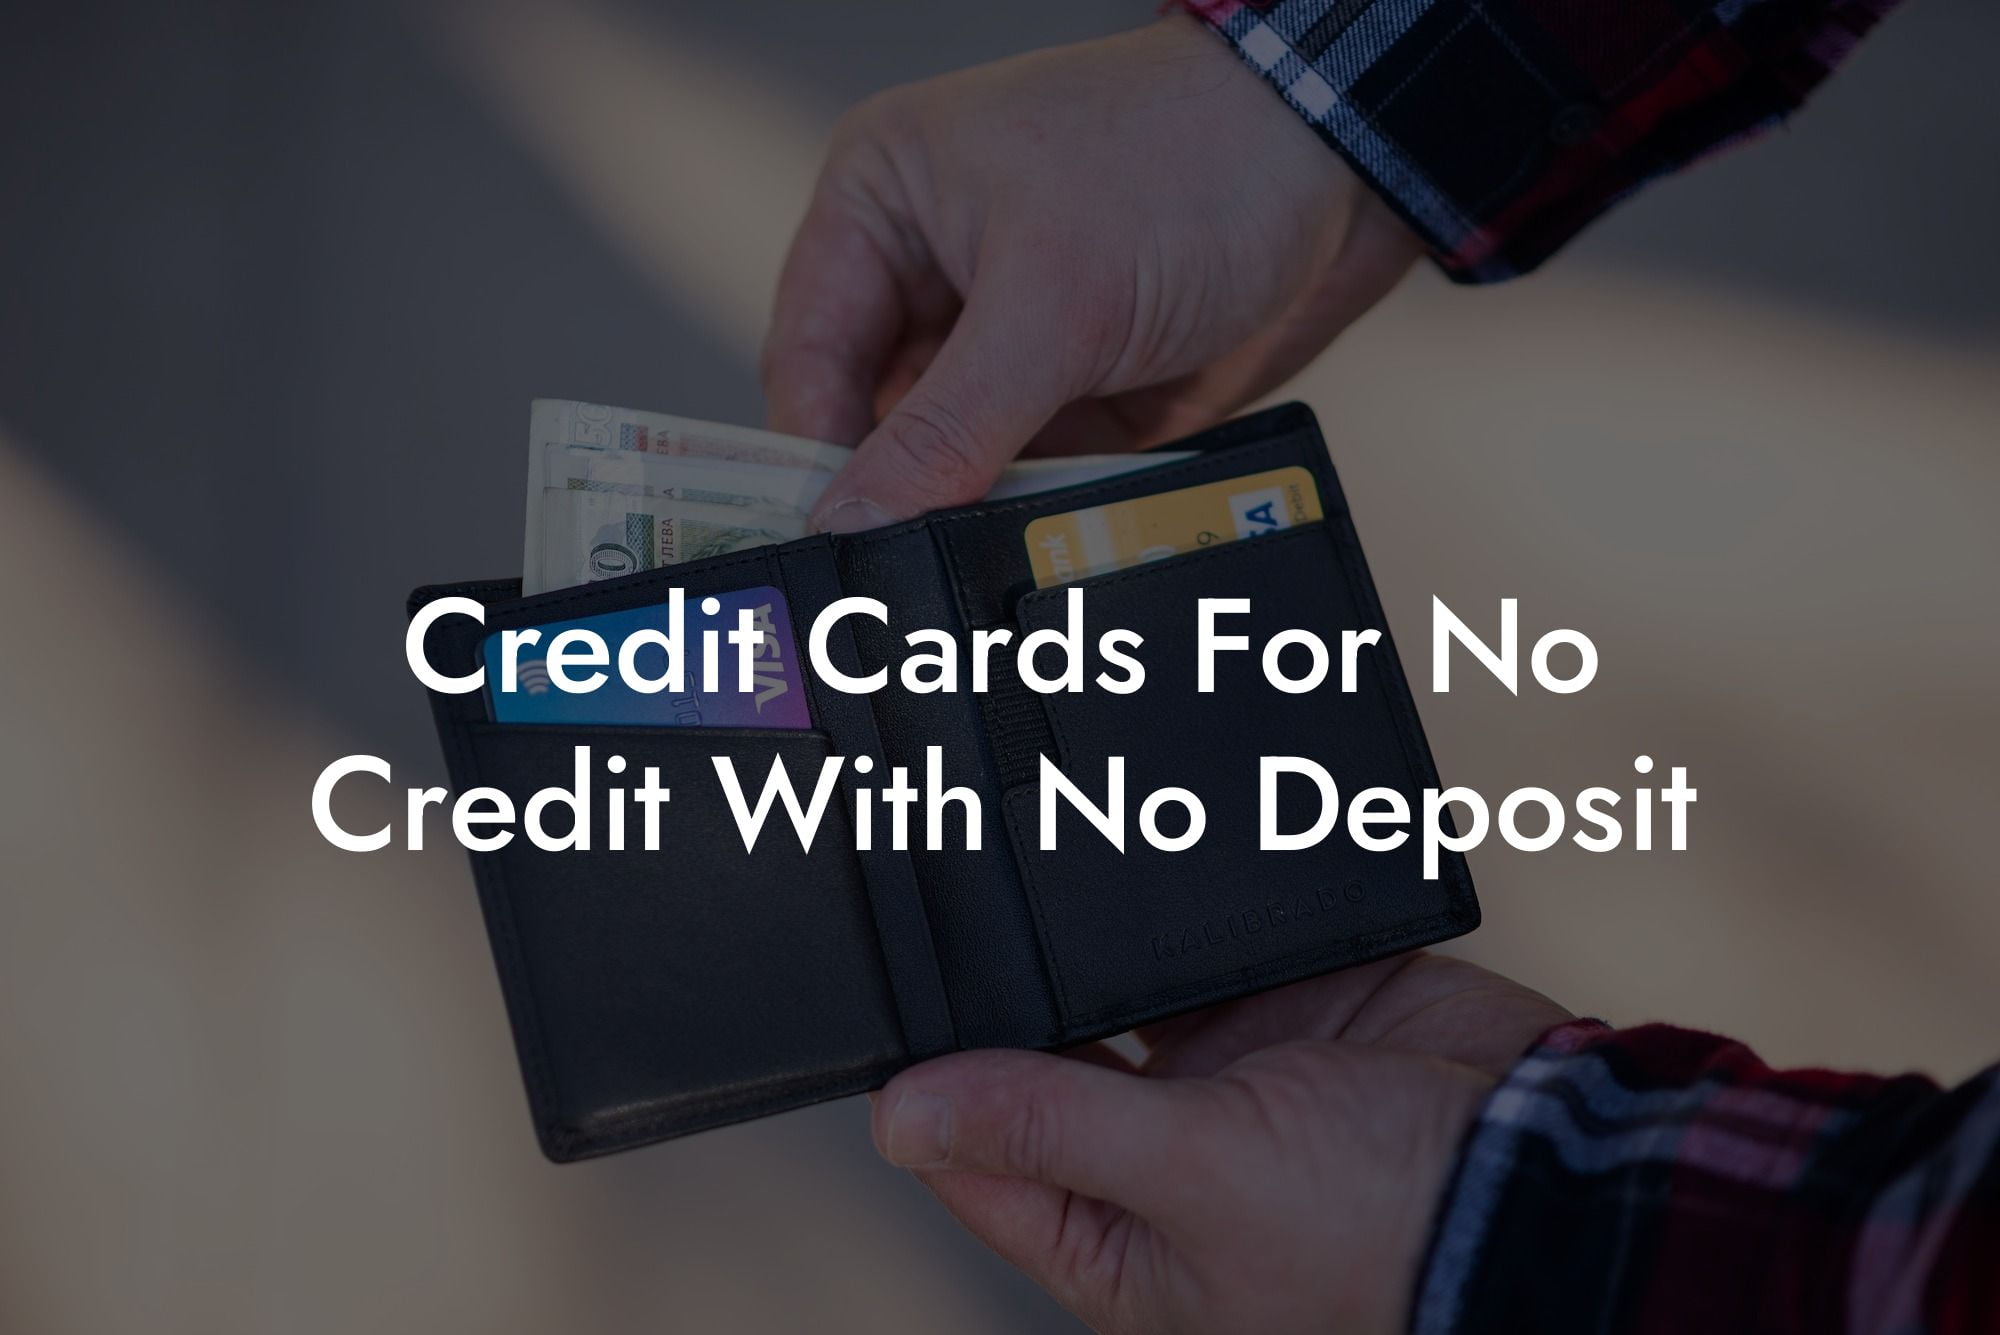 Credit Cards For No Credit With No Deposit